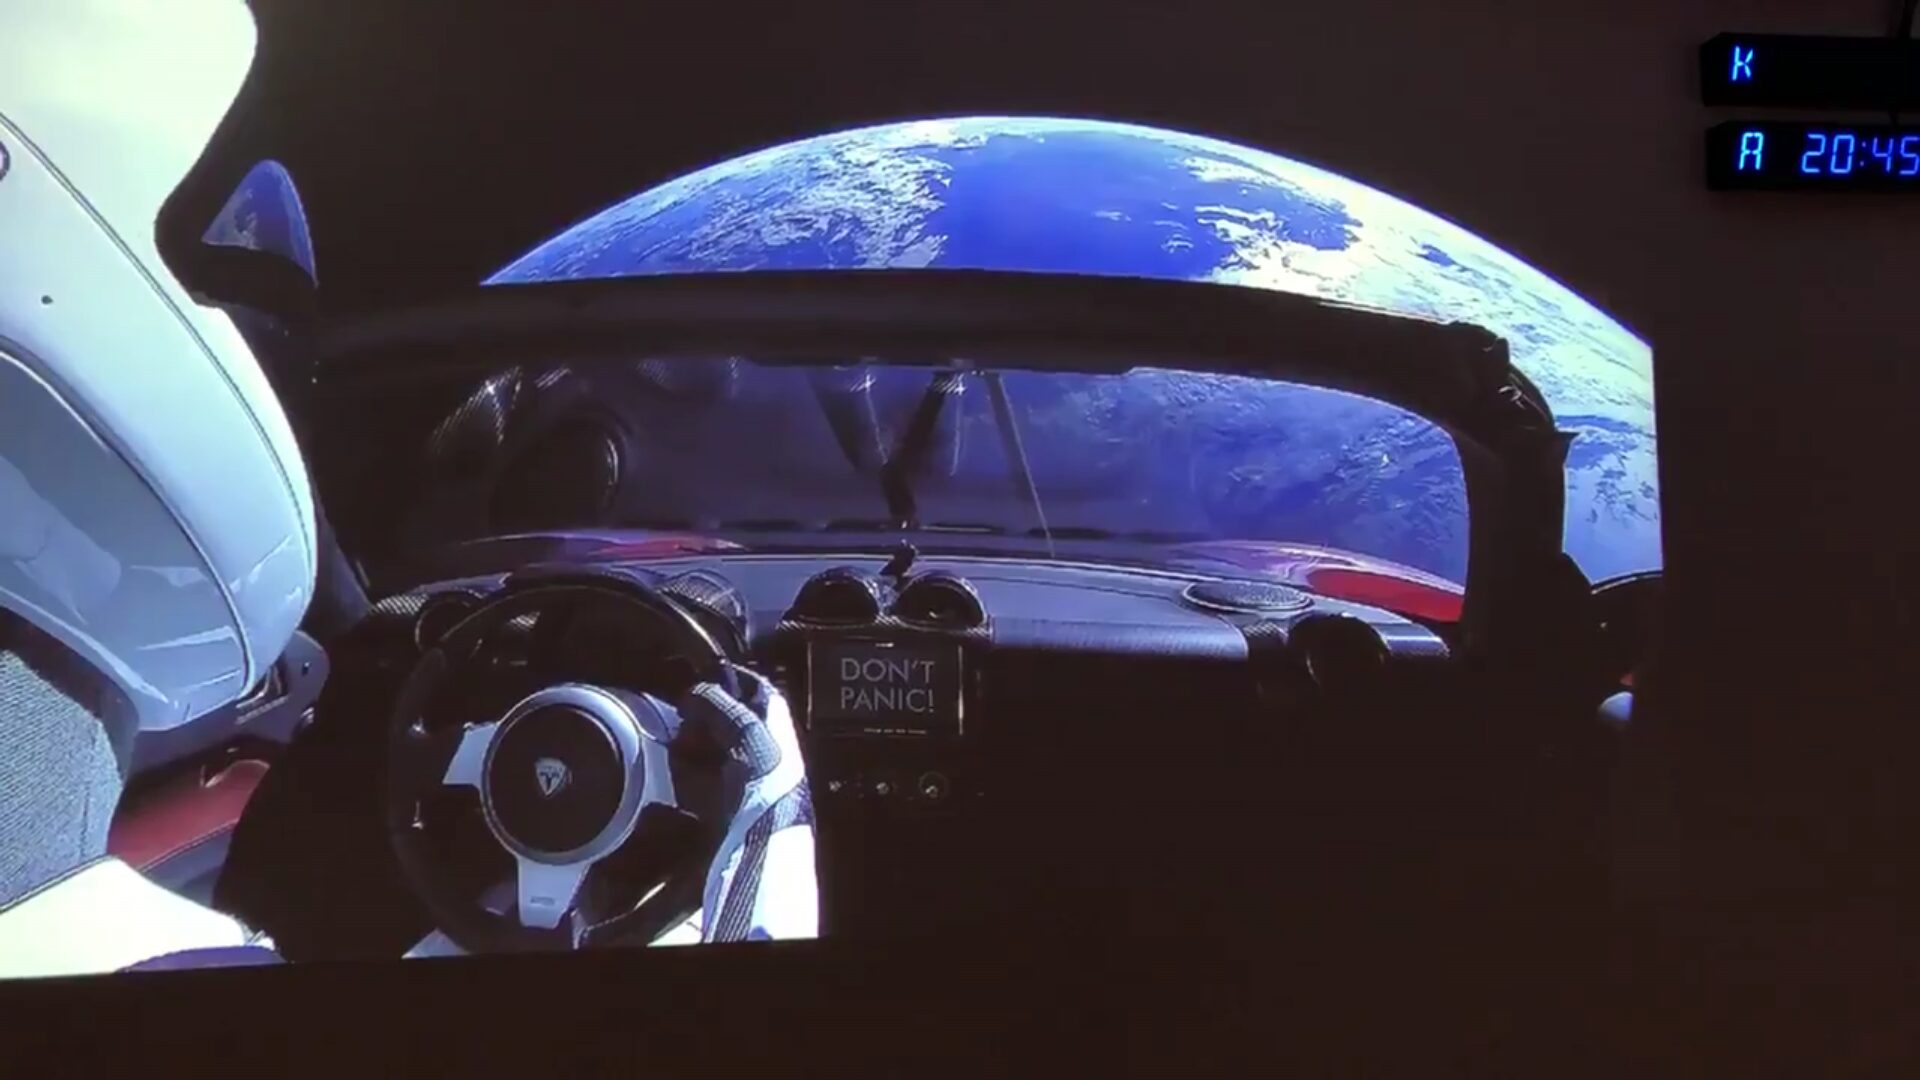 If they Brought Elon Musk’s Tesla Roadster Back from Space, Would it Work?